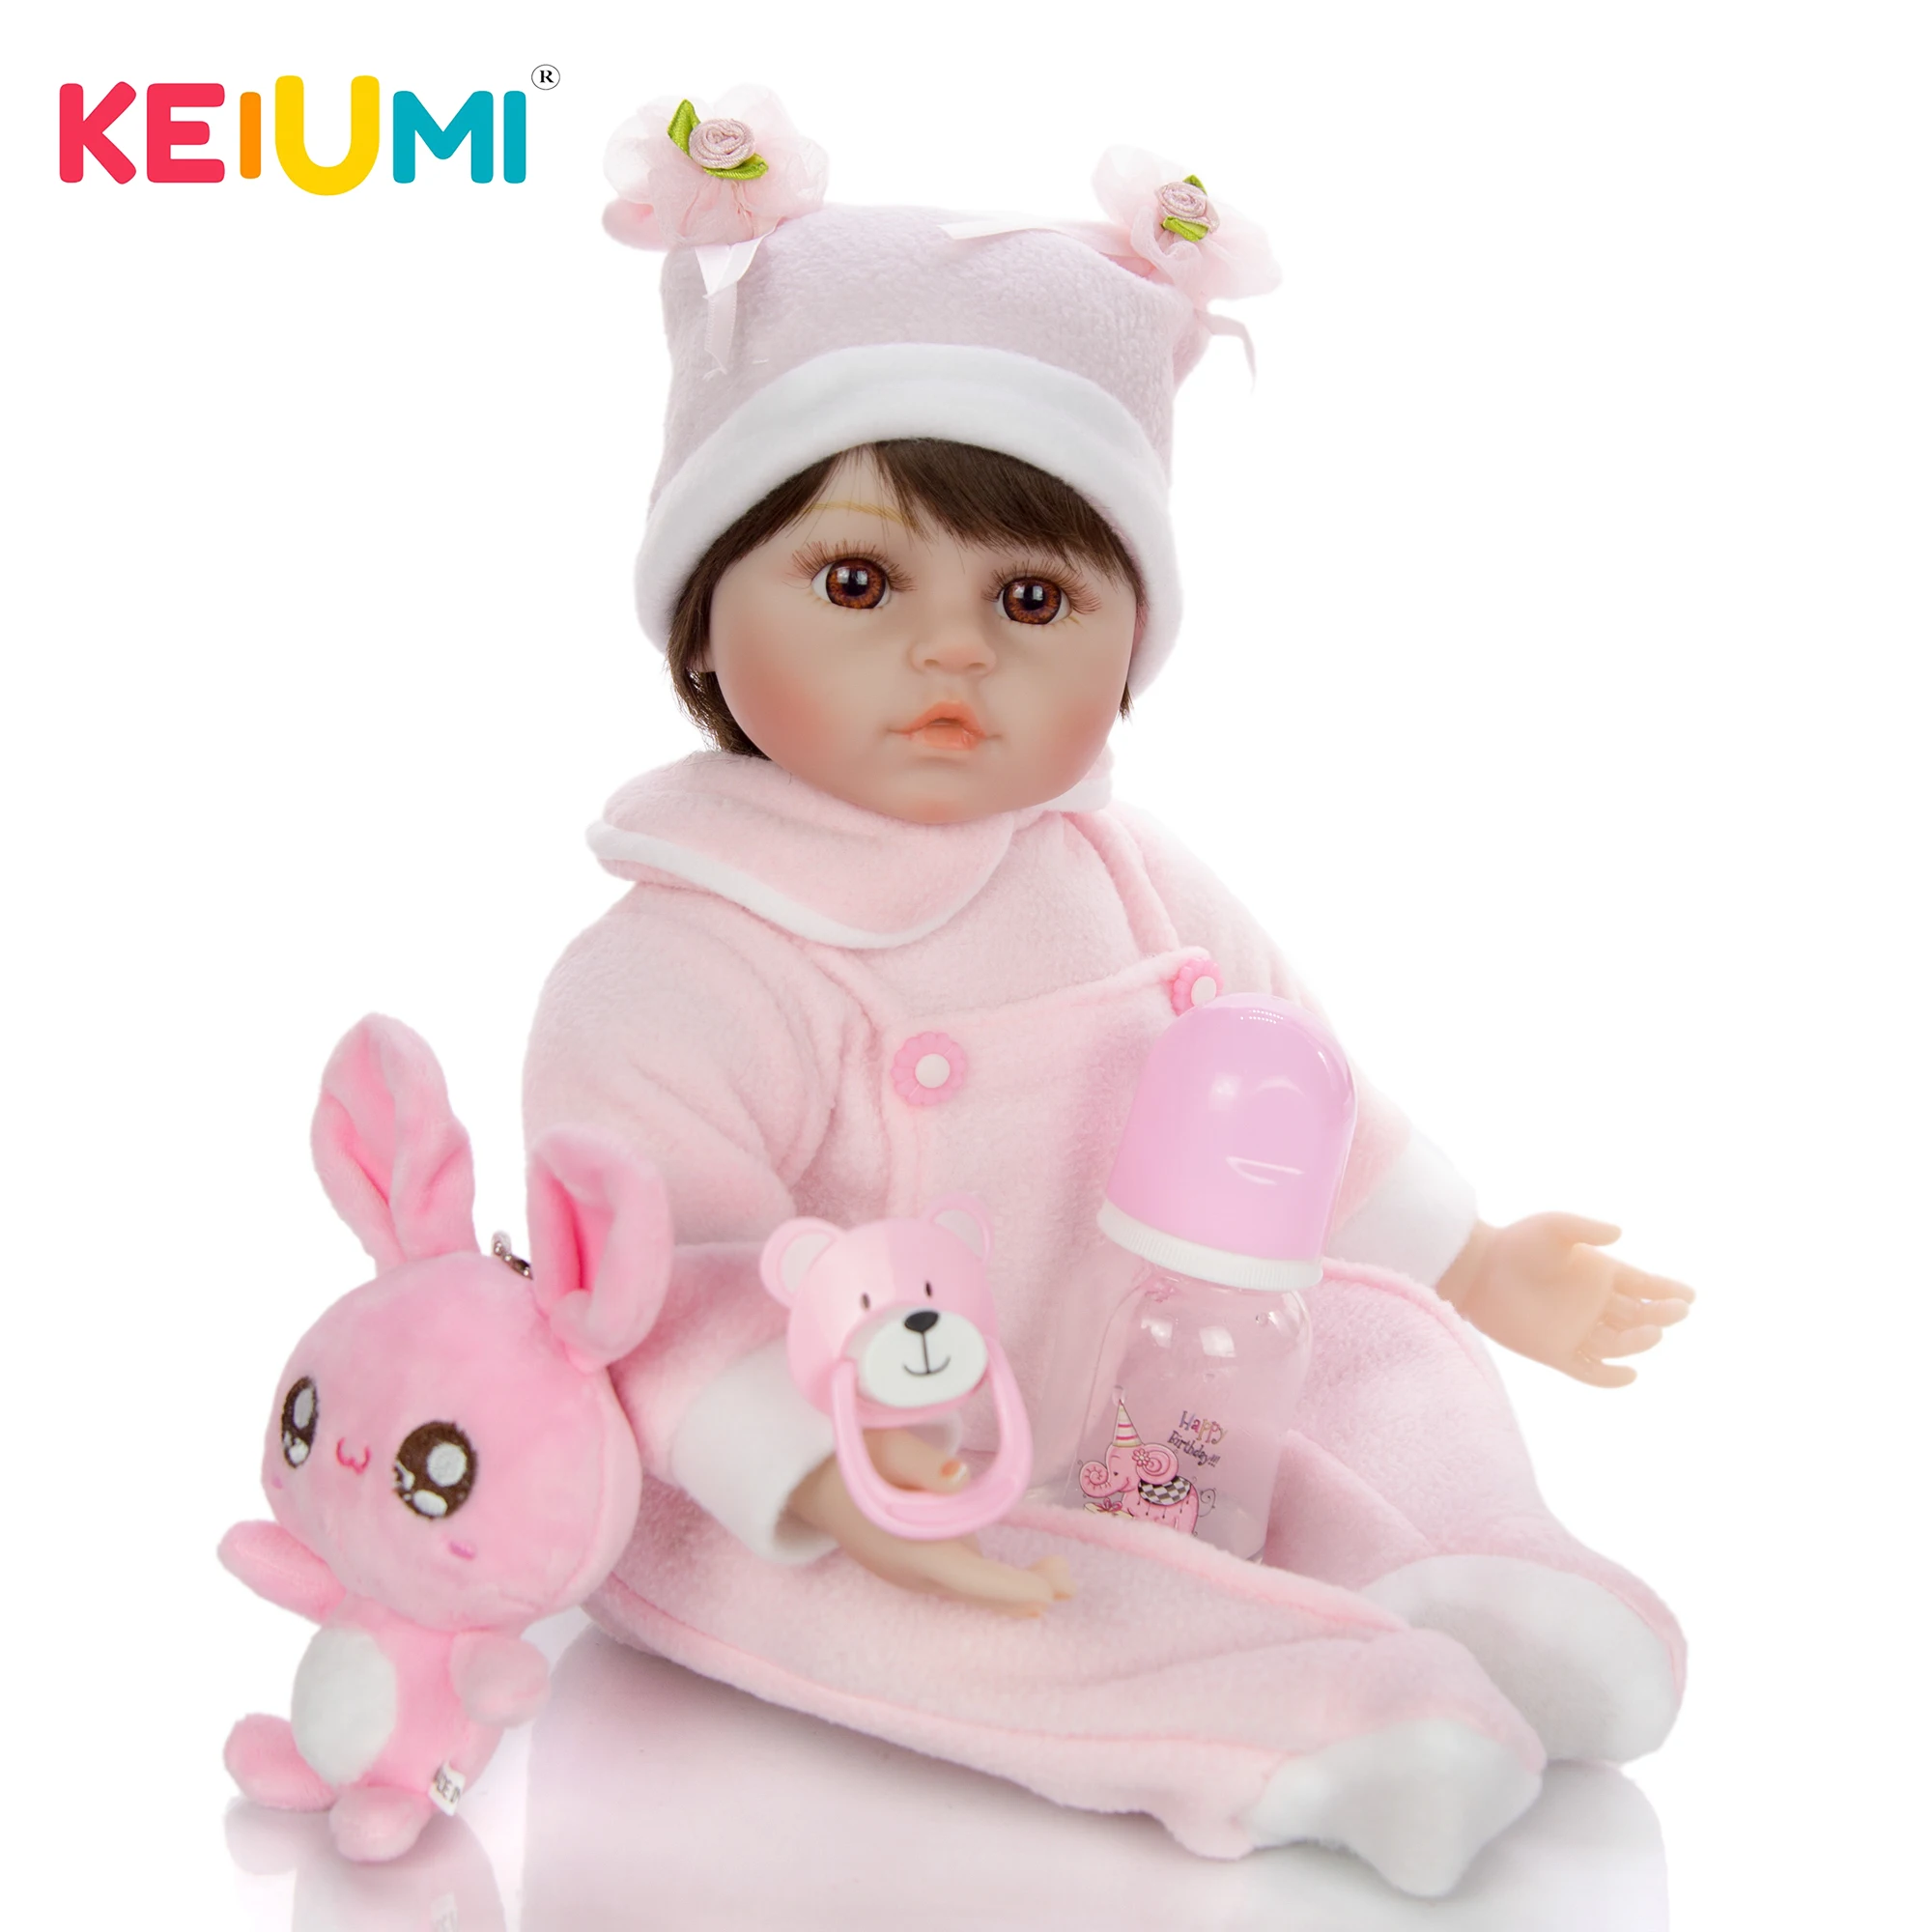 Details about   Reborn Baby Girl Doll Full Silicone Body Vinyl Realistic Dolls Babies Toys Gifts 